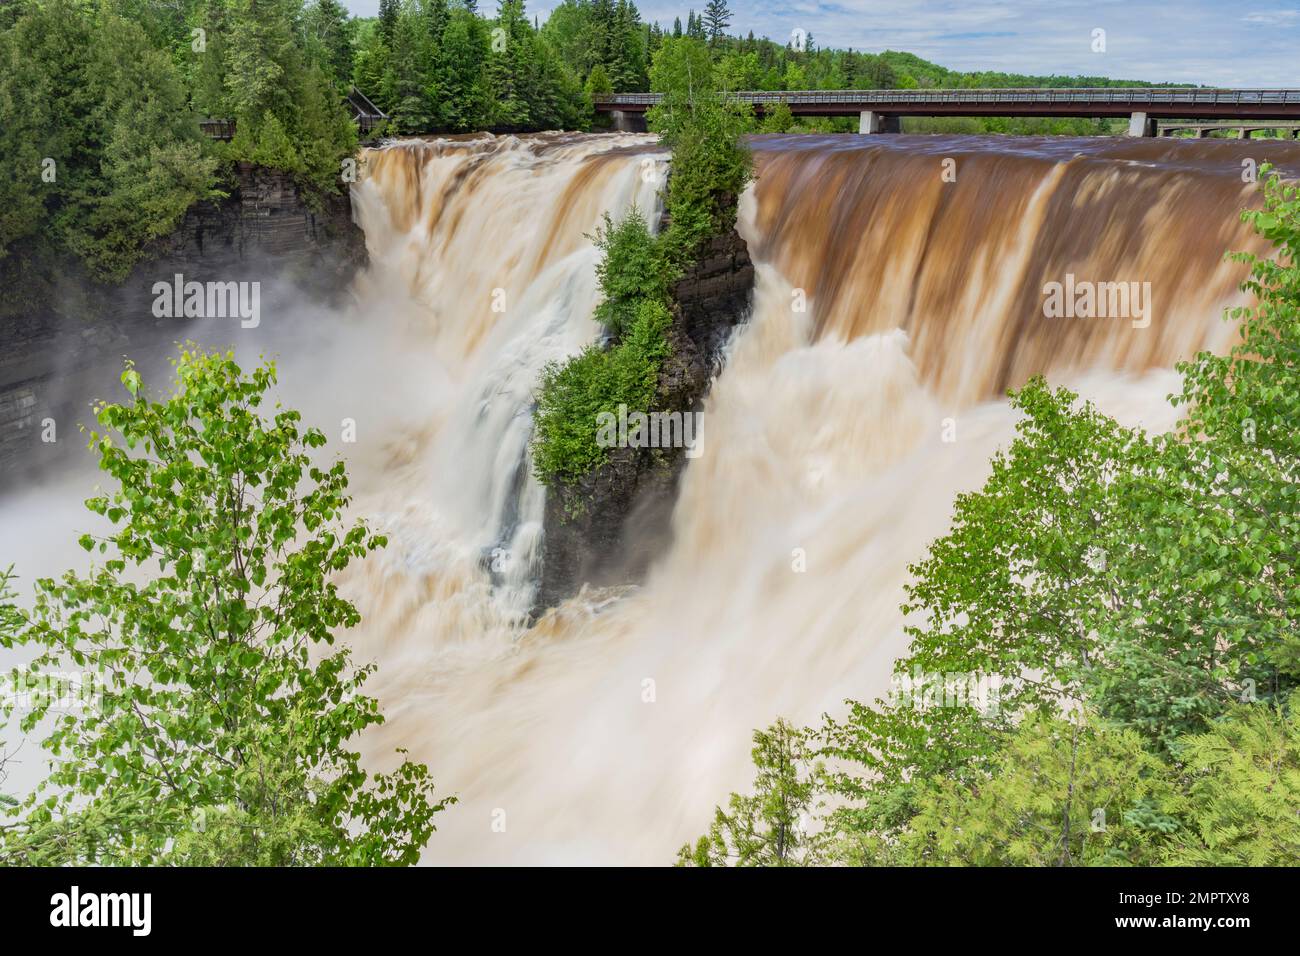 The 'Niagara of the North,' Kakabeka Falls is located west of Thunder Bay, Ontario, Canada.  It is a 130-ft. plunge-type waterfall. Stock Photo